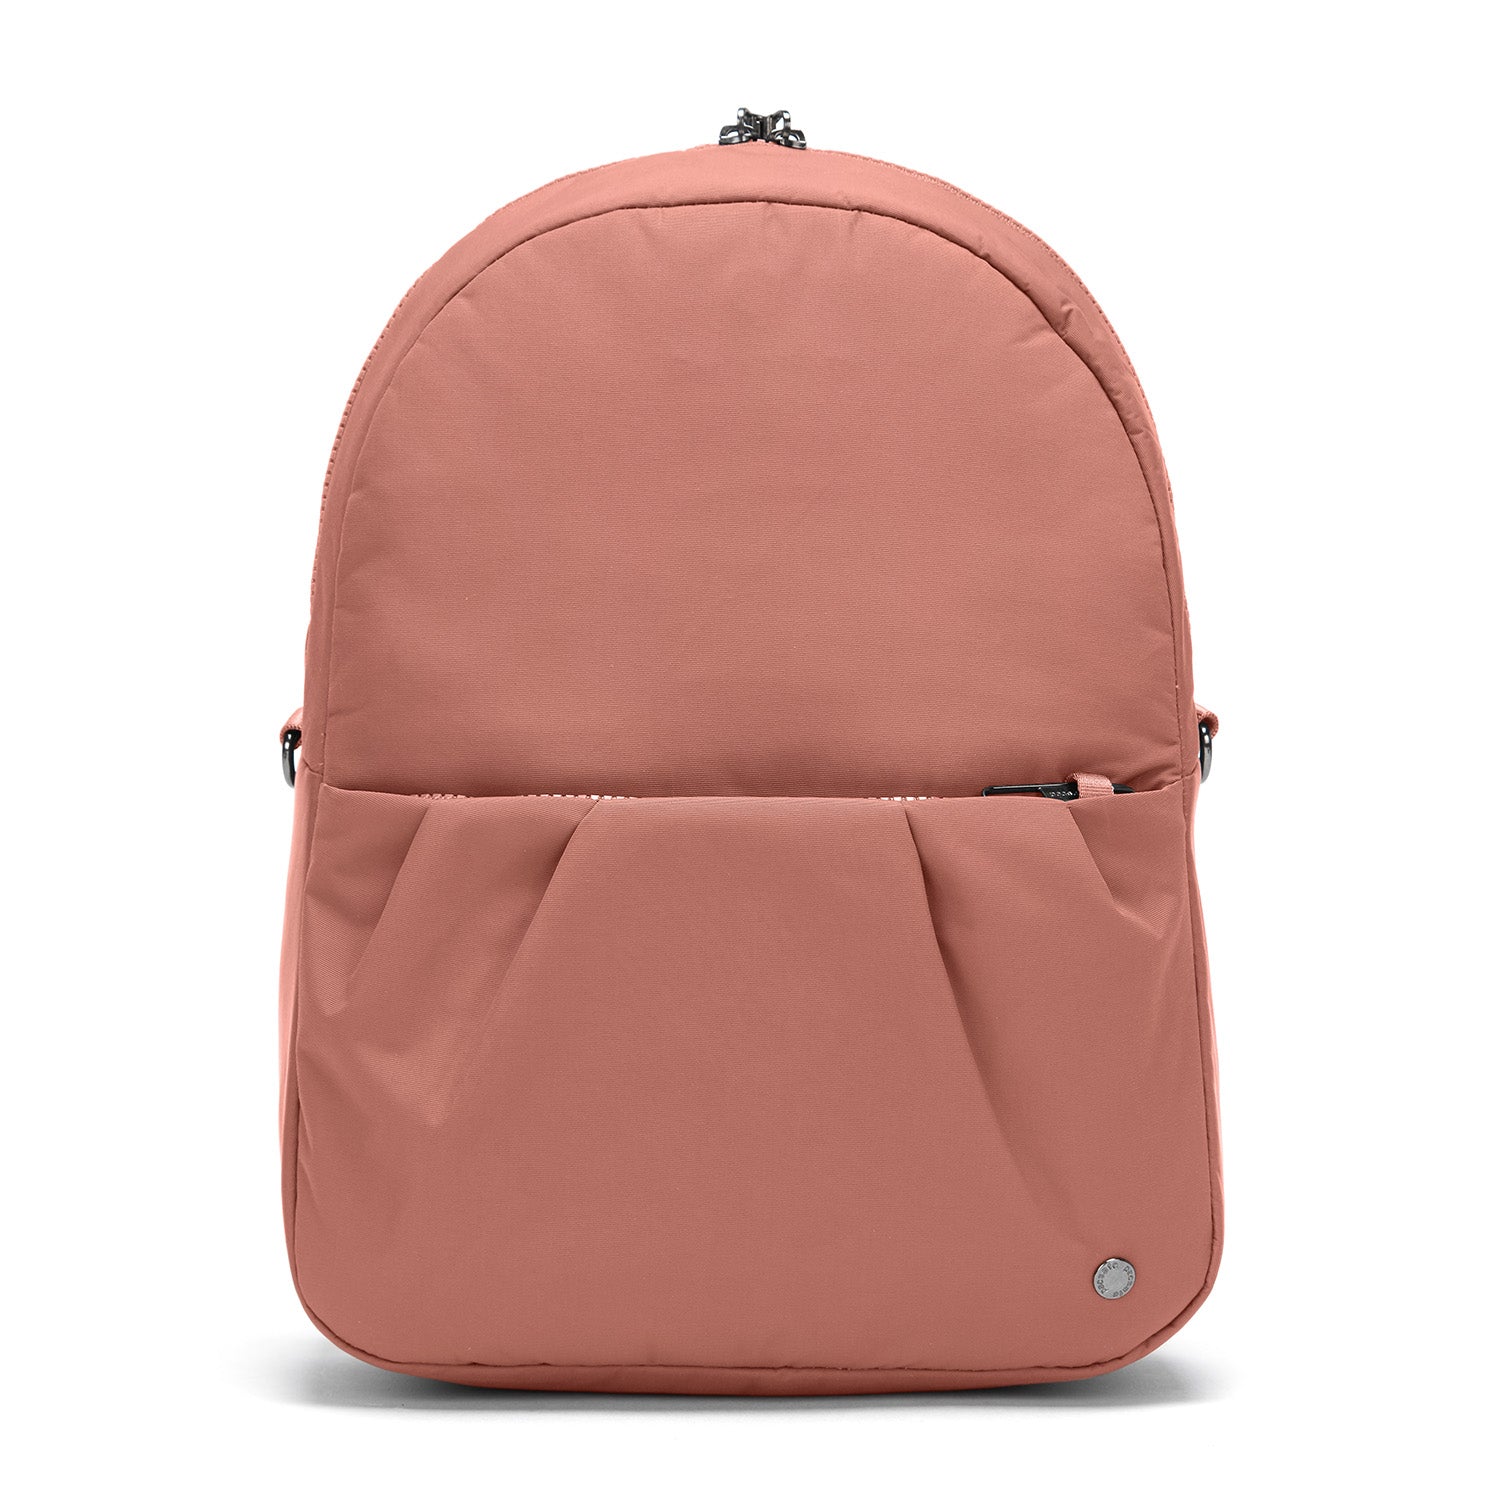 Pacsafe - CX Convertible Backpack - Rose-7